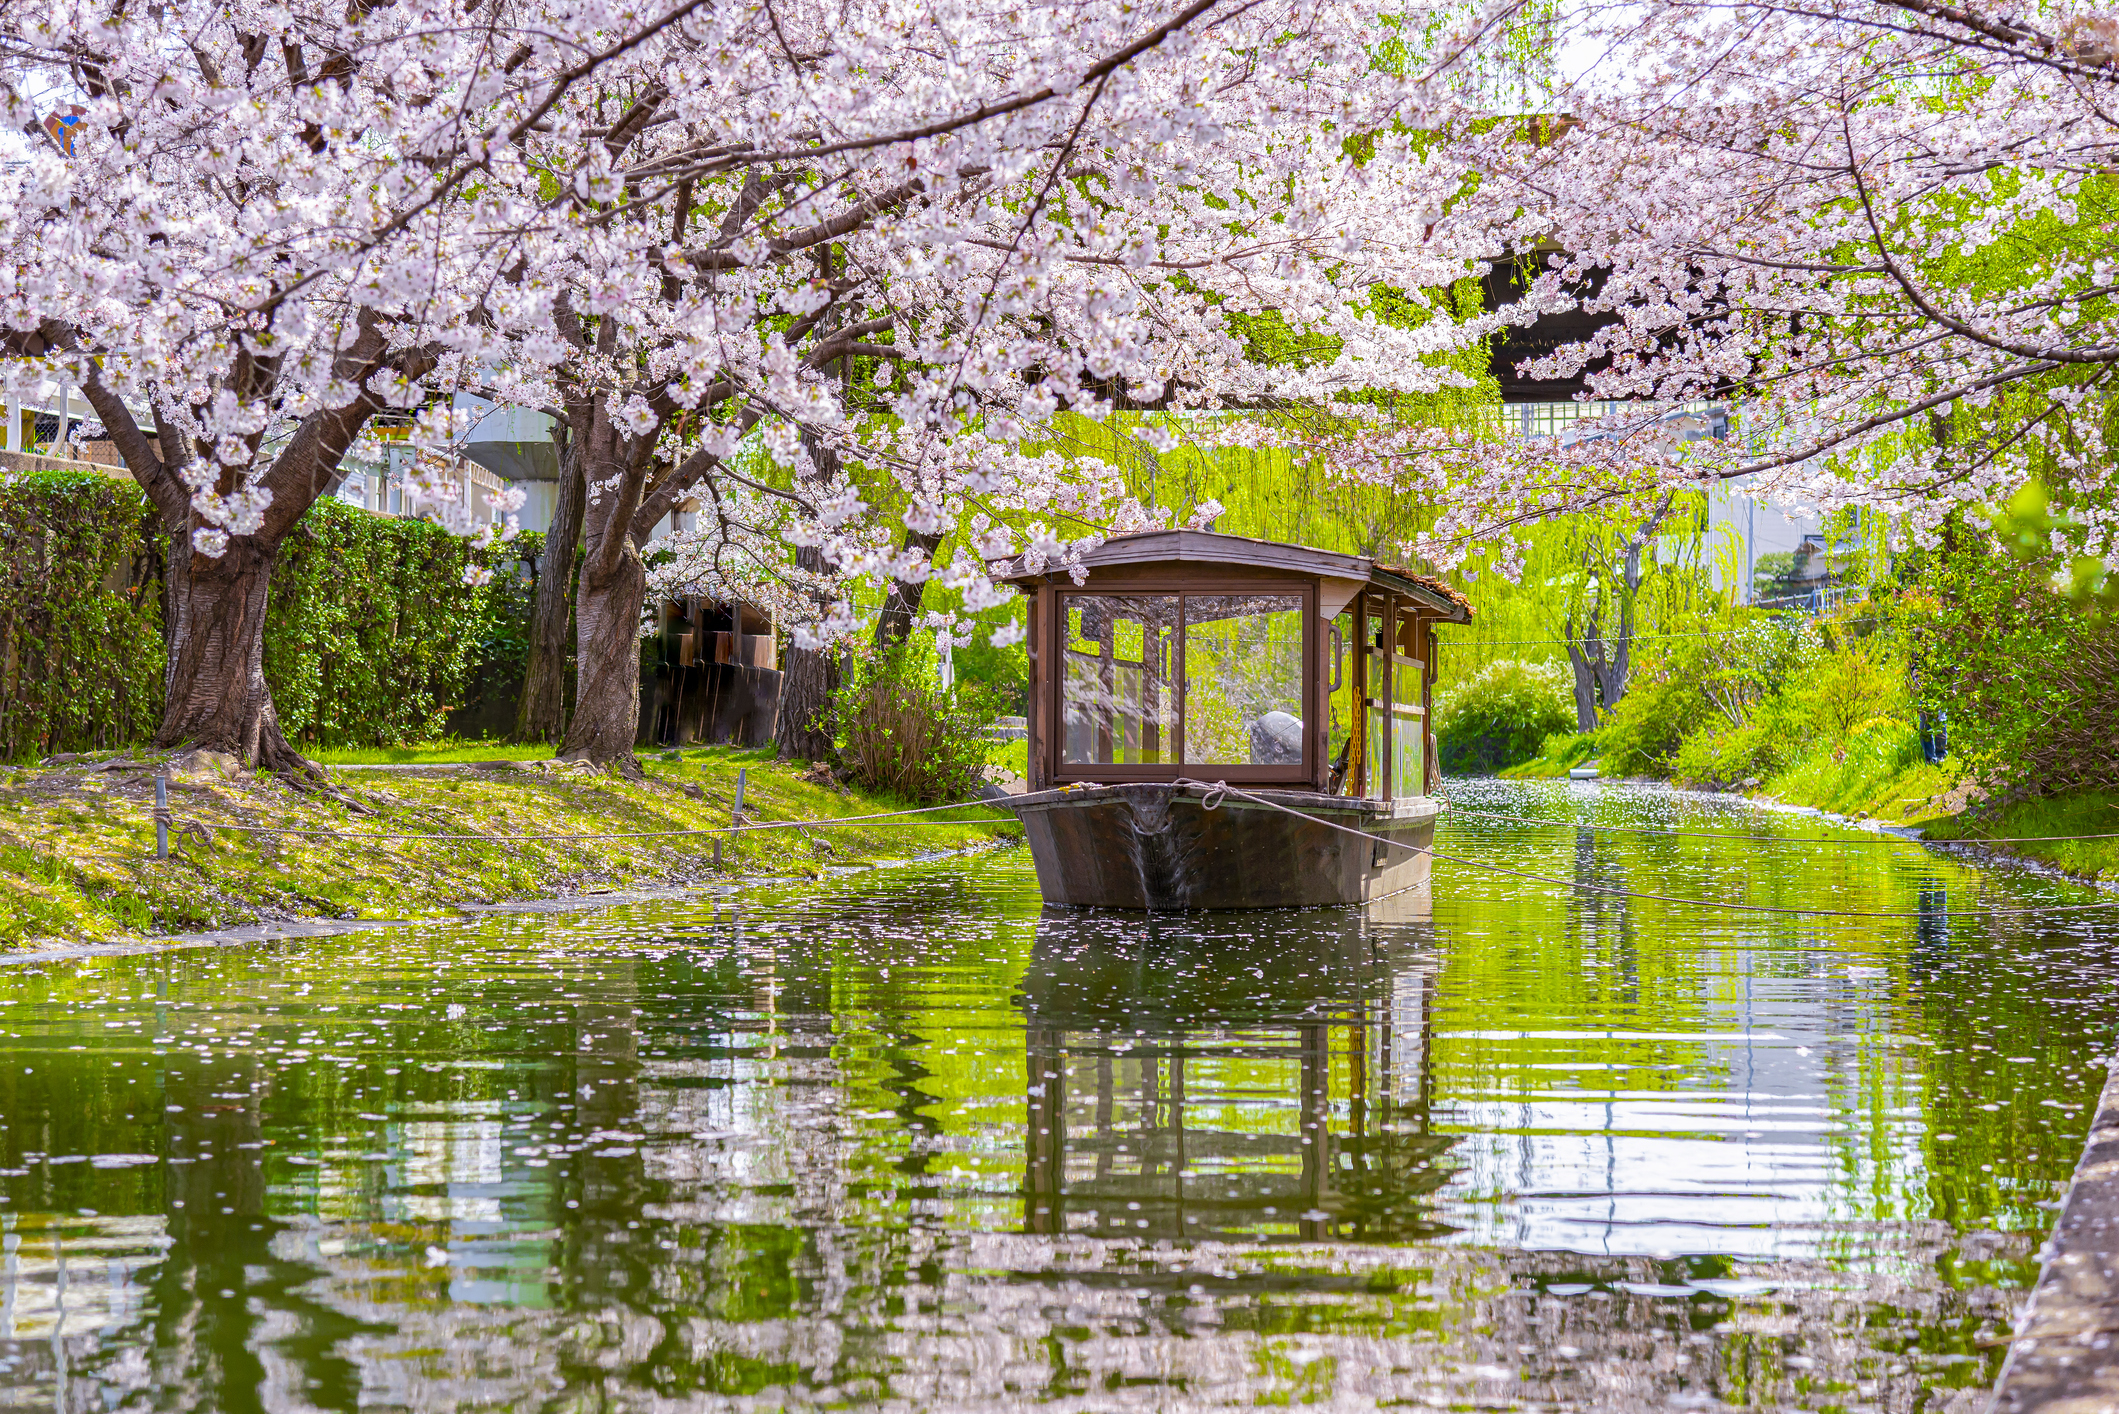 Boat glides under cherry blossoms on a calm river, a serene depiction of springtime travel in Japan